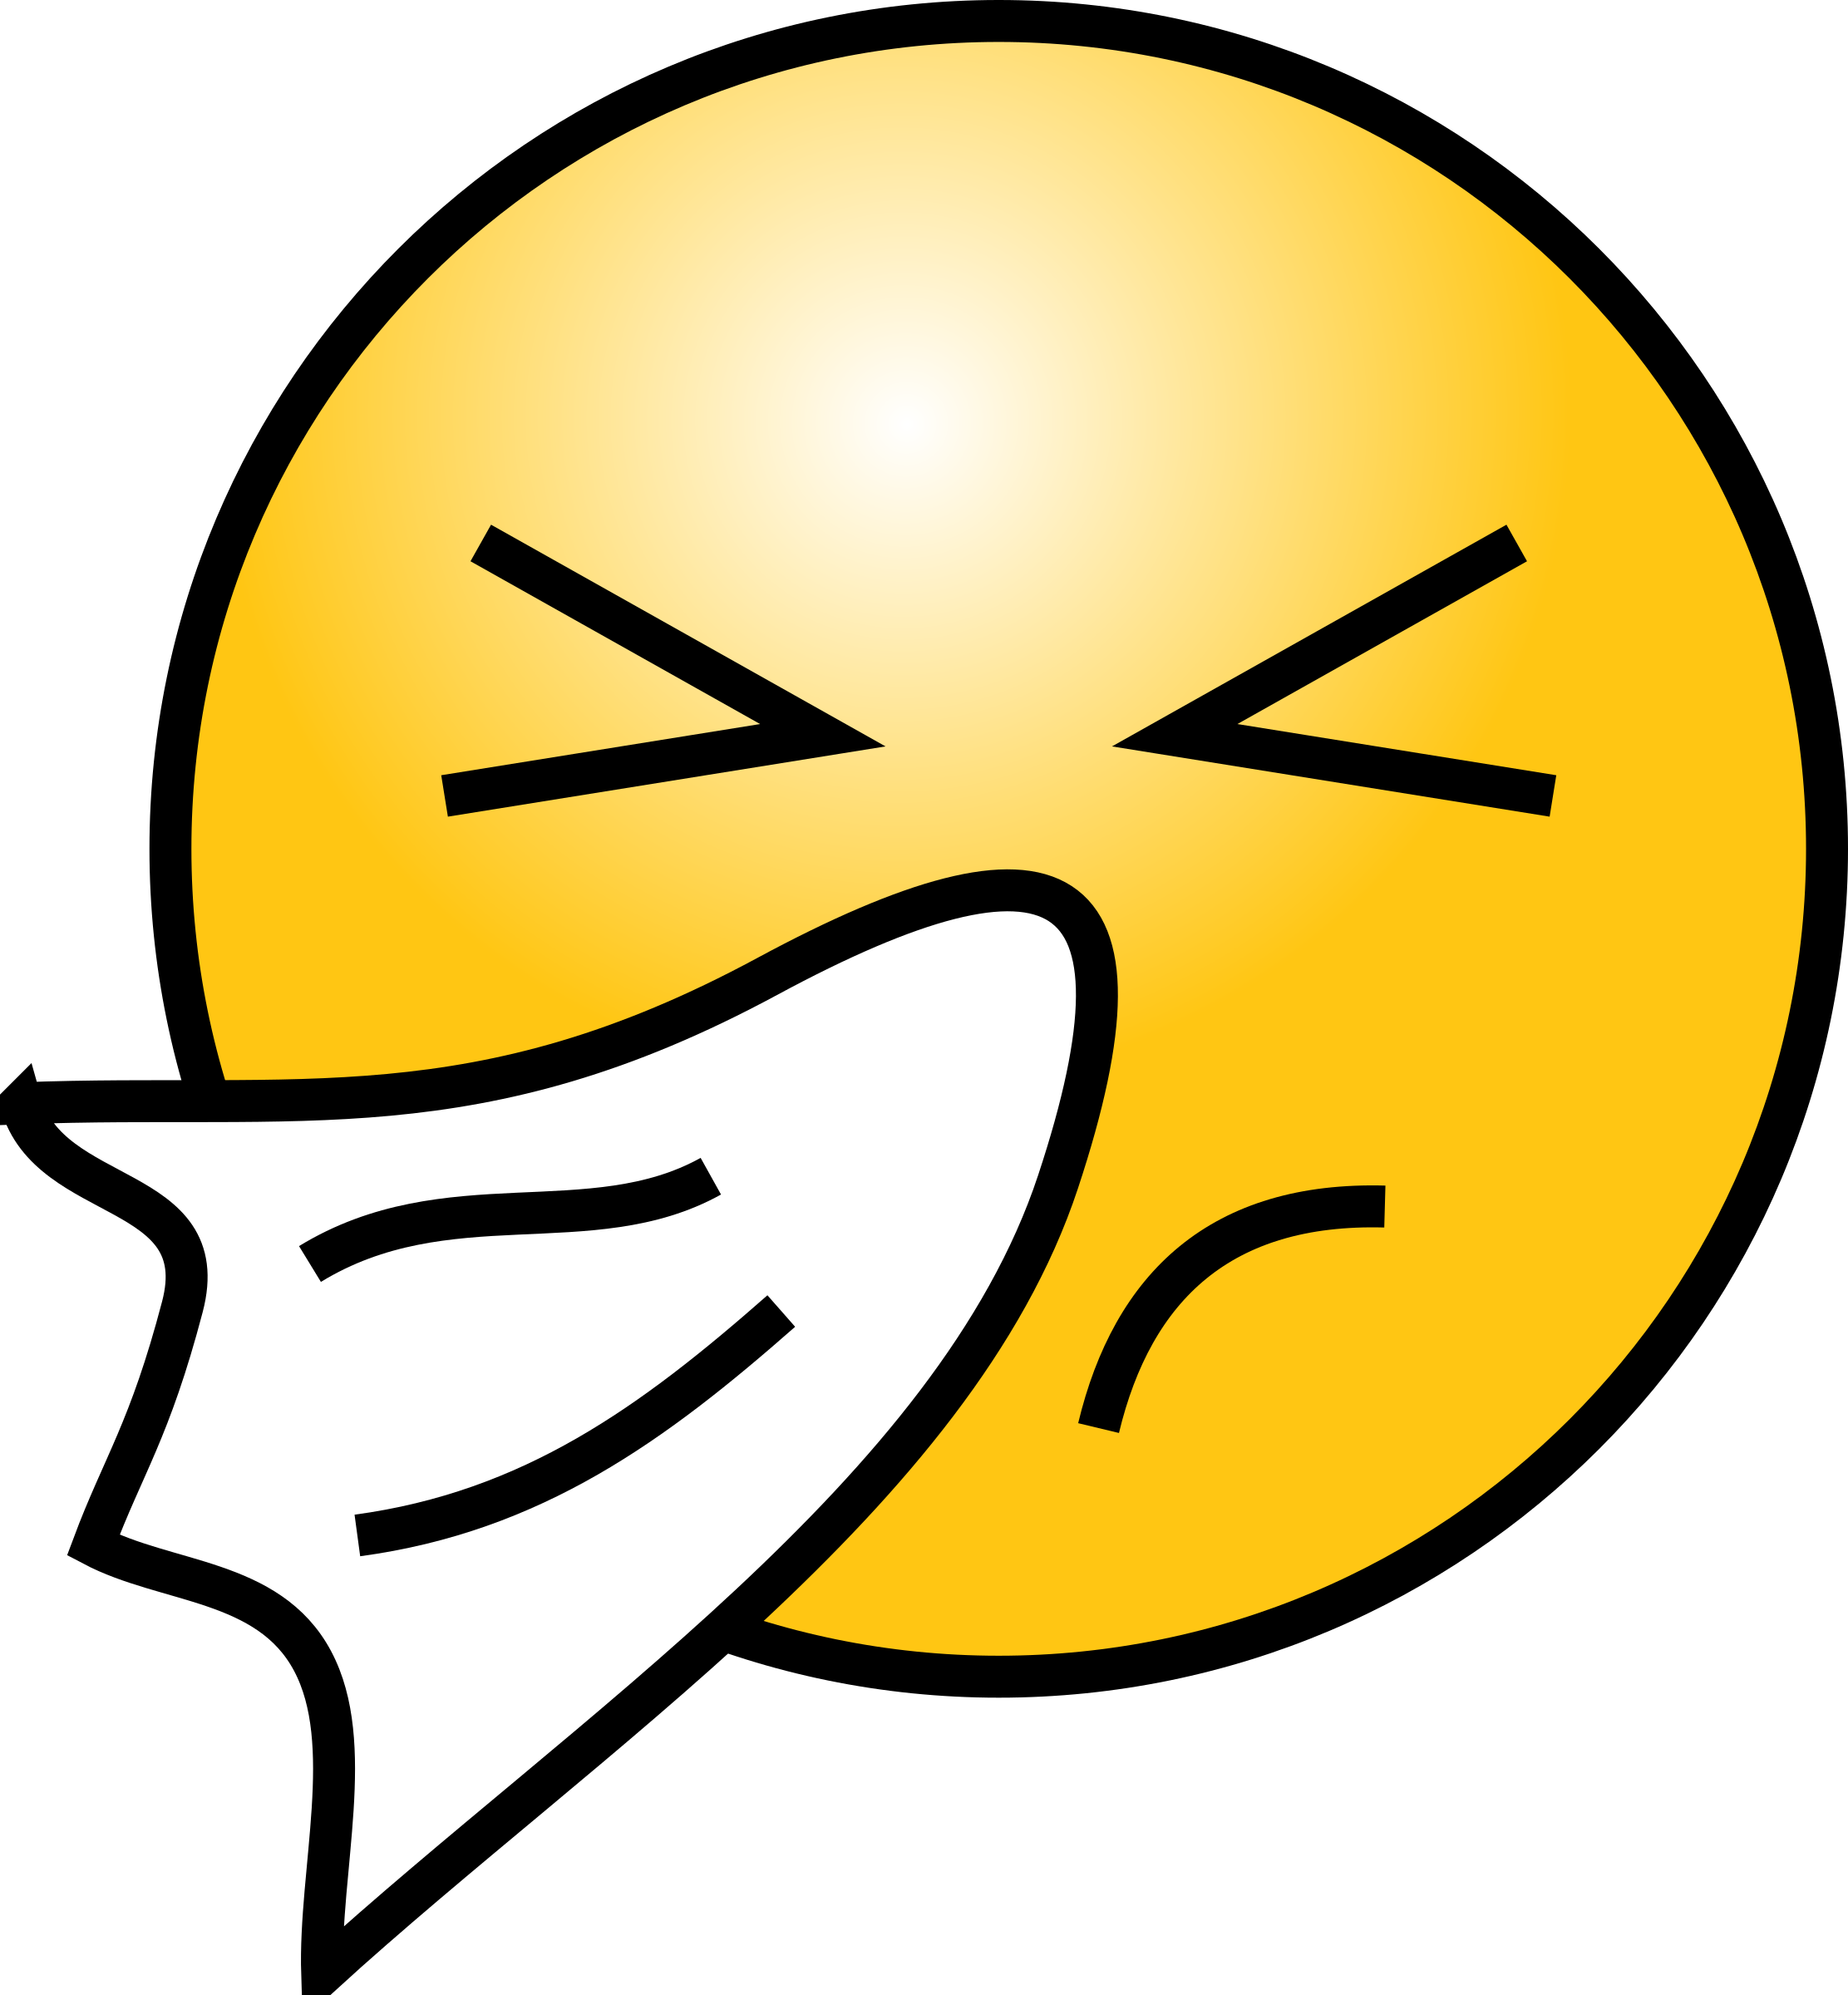 Clipart - Smiley Face with a Cold, Sneezing into Handkerchief